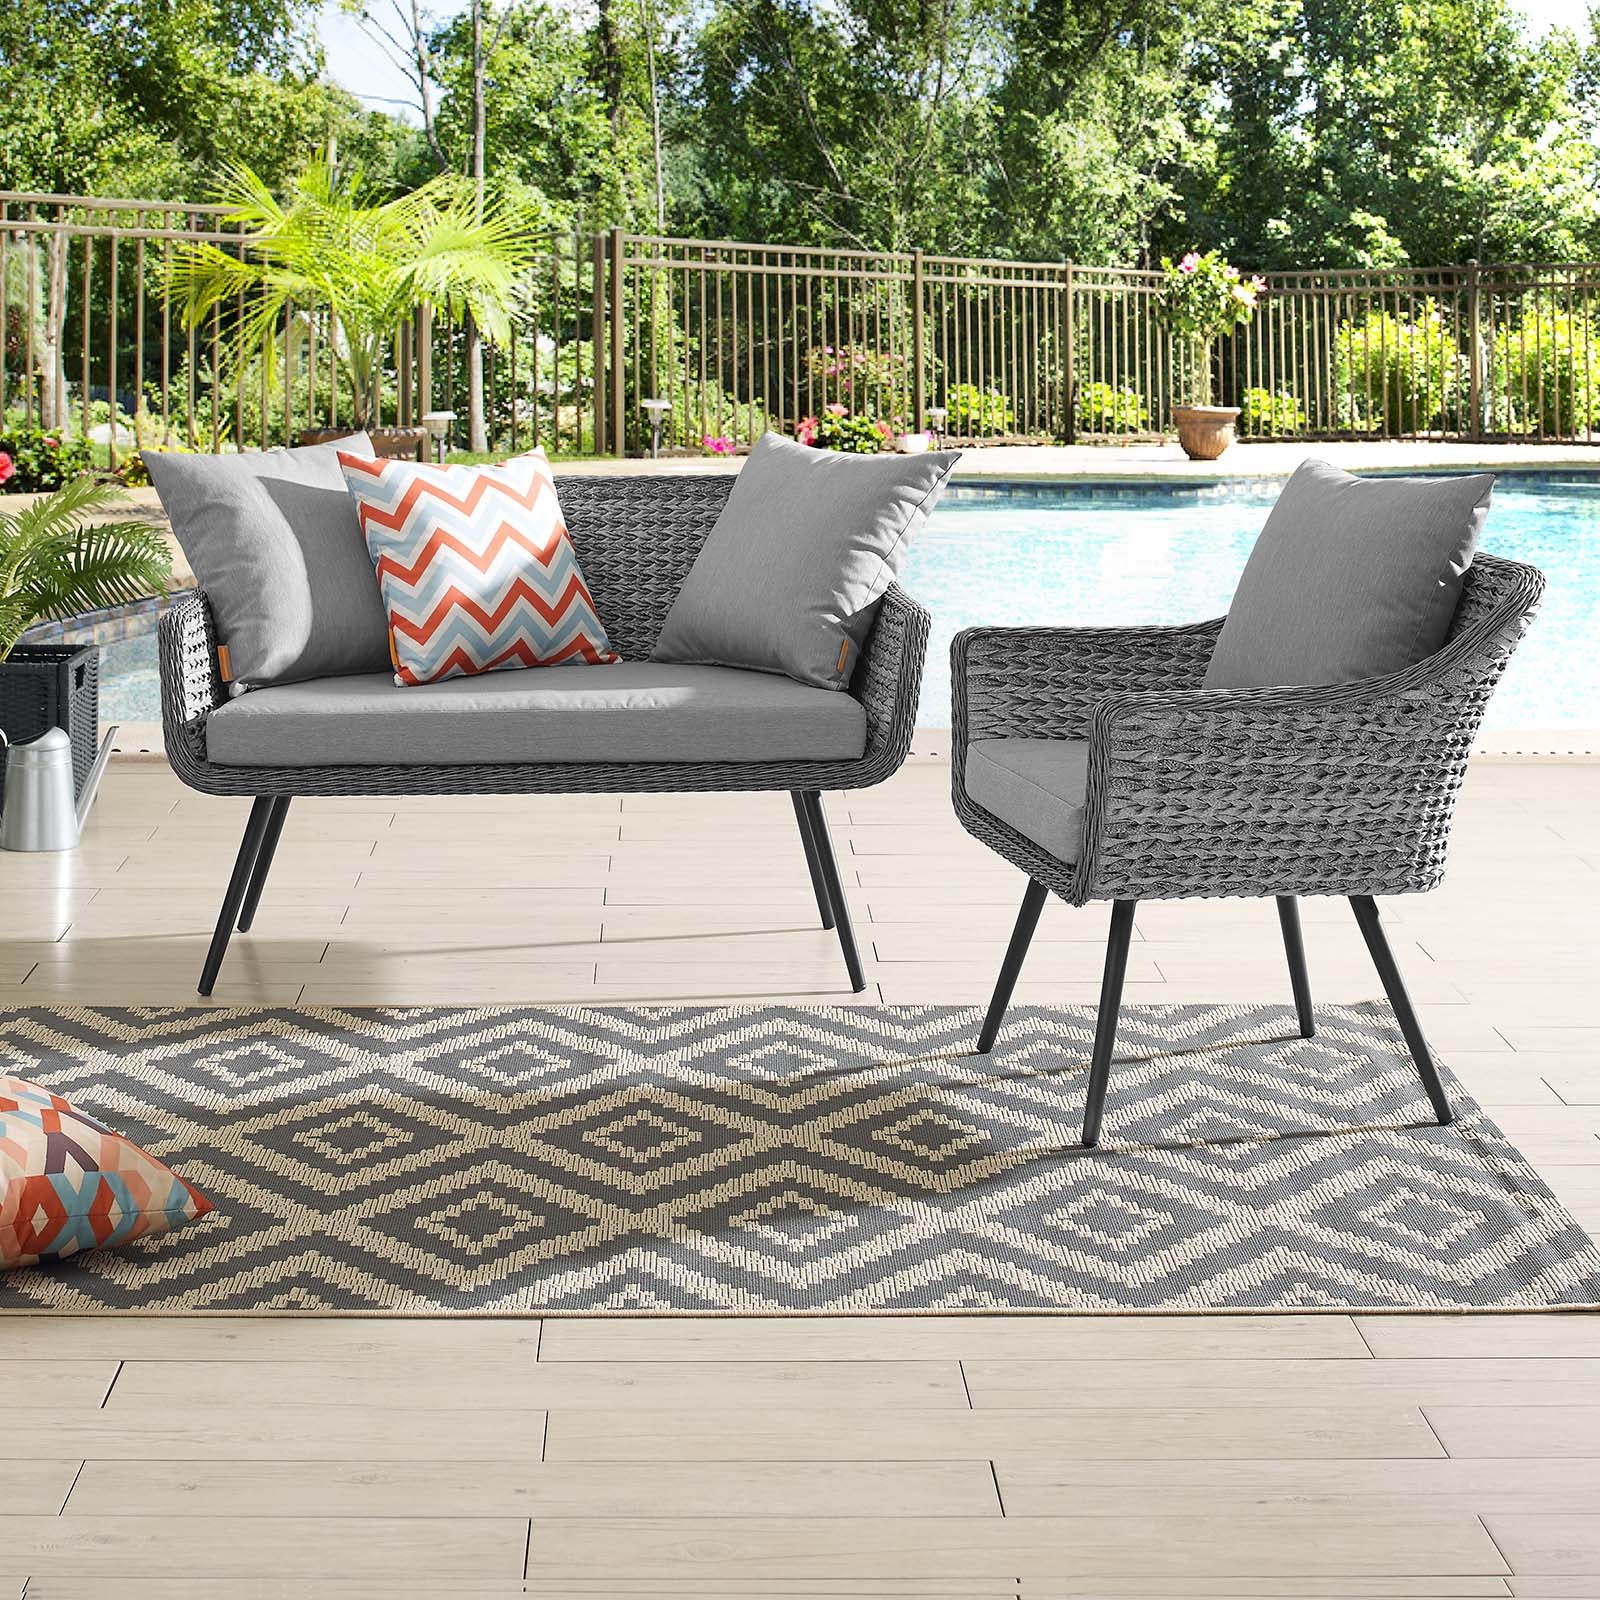 Endeavor 2 Piece Outdoor Patio Wicker Rattan Loveseat and Armchair Set - East Shore Modern Home Furnishings